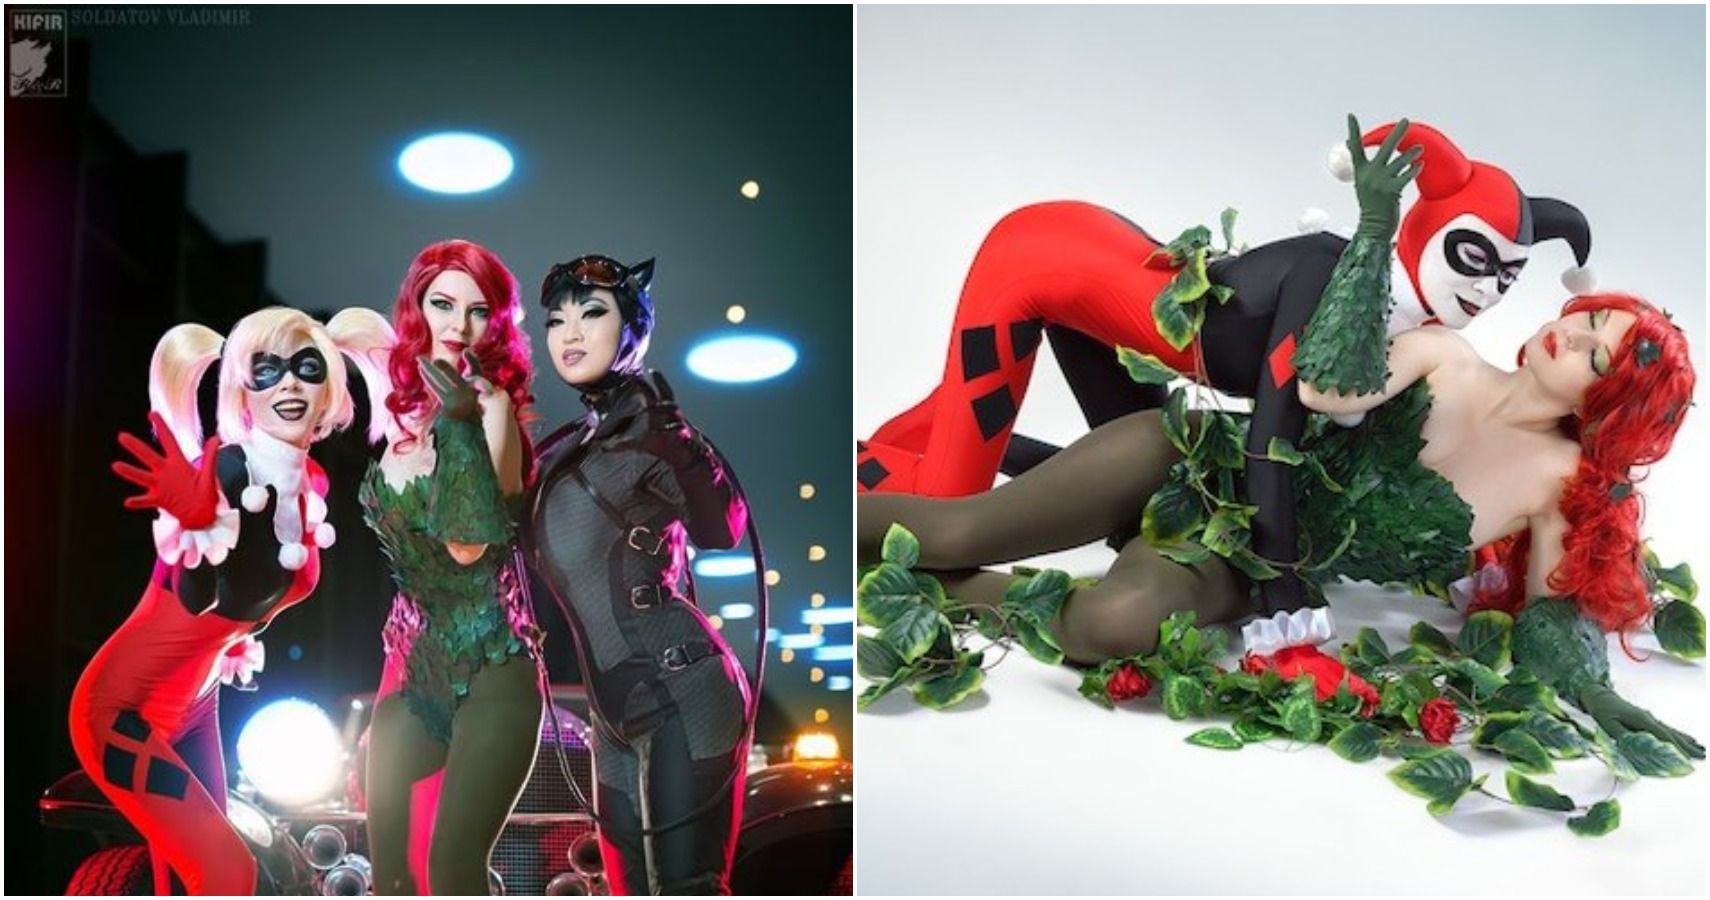 10 Gotham City Sirens Cosplay That Look Just Like The DC Comics